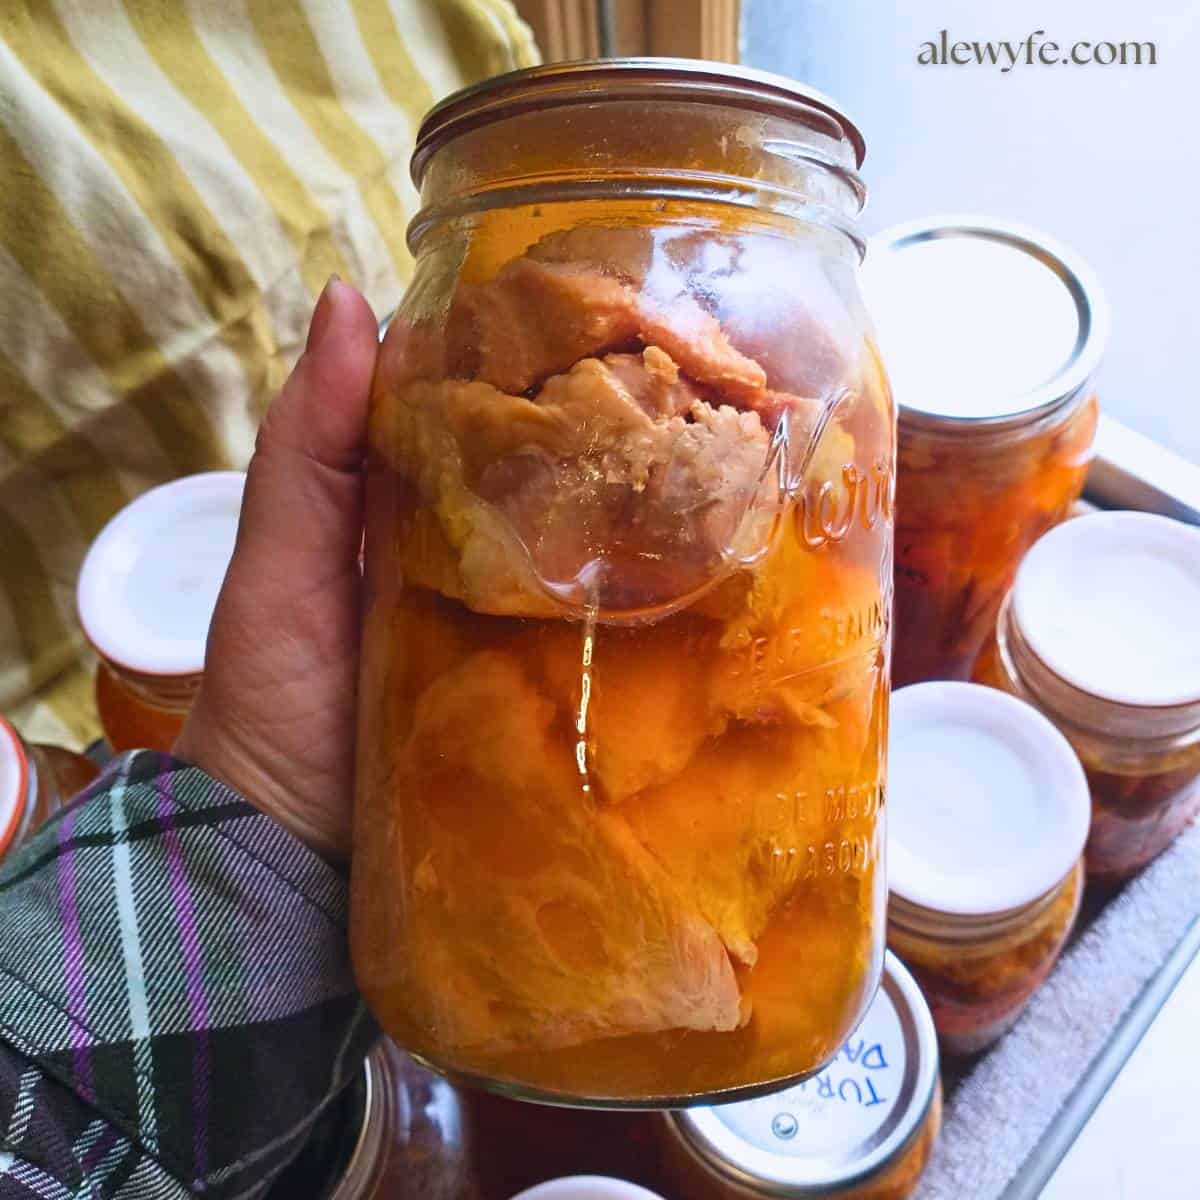 a hand holding a quart canning jar with chunks of turkey breast in golden colored broth. In the background is a tray with more jars of turkey.